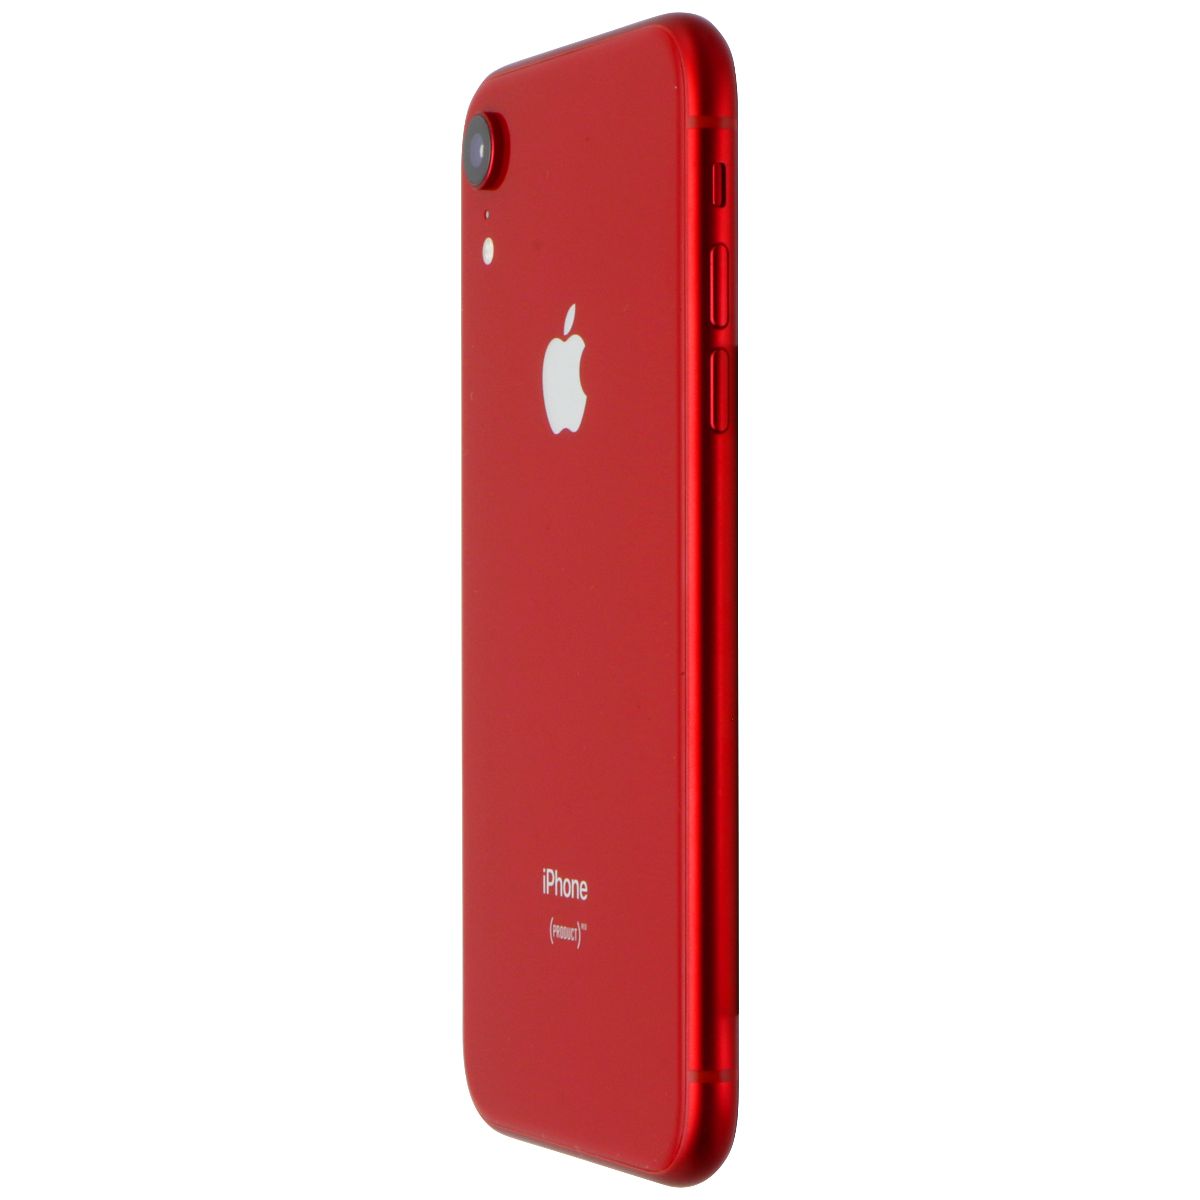 Apple iPhone XR (6.1-inch) Smartphone (A1984) Ultra Mobile Only - 128GB / Red